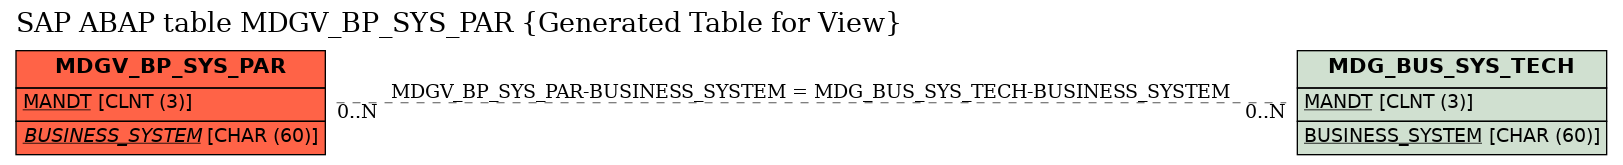 E-R Diagram for table MDGV_BP_SYS_PAR (Generated Table for View)